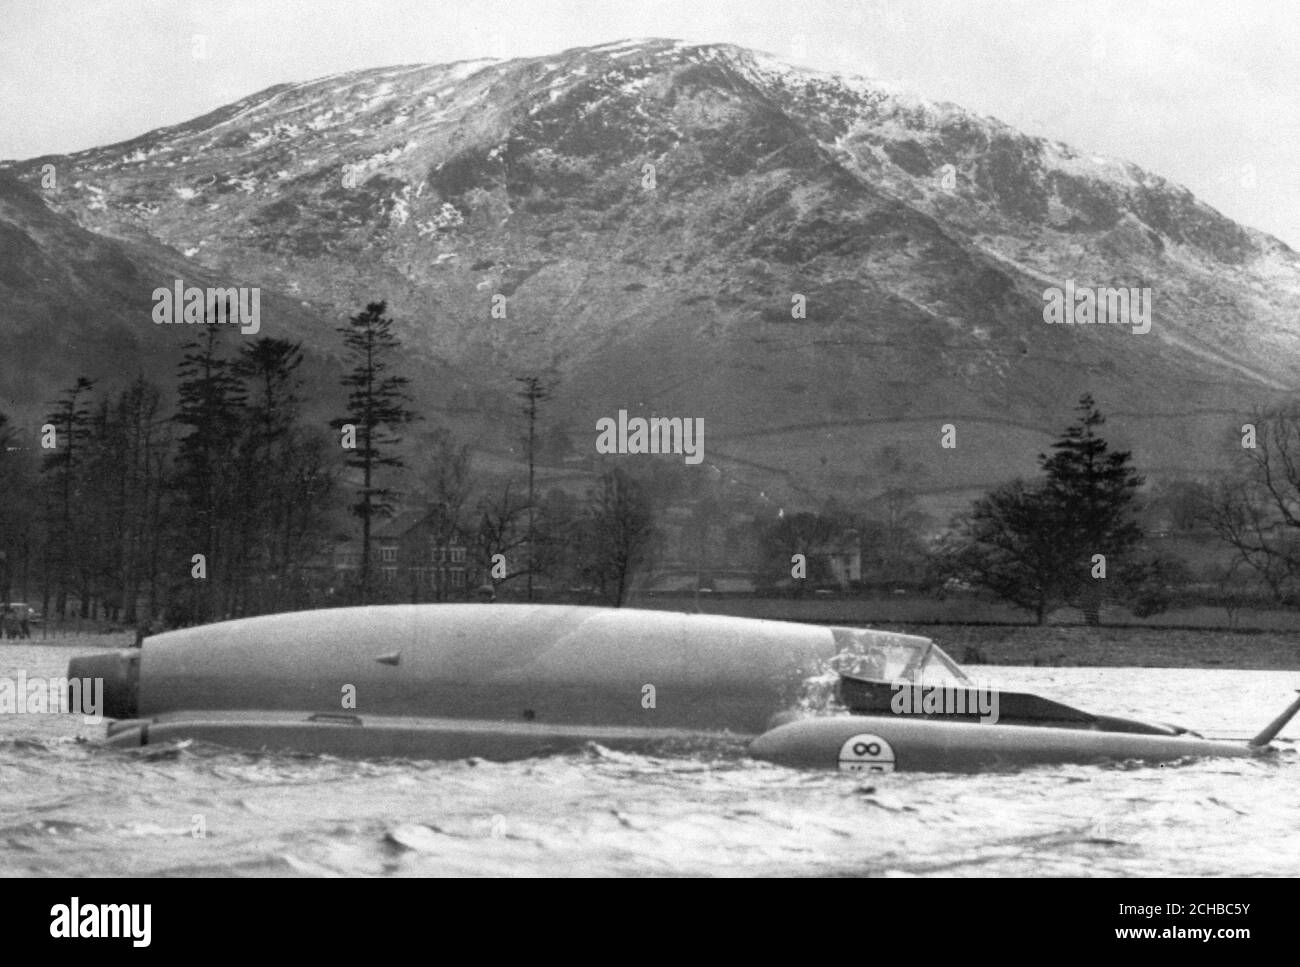 Donald Campbell's turbojet hydroplane Bluebird is driven today under her own power for the first time. Mr Campbell gently steered her around the lake at Ullswater at a few knots as part of his preparation for his attempt on the world water speed record. Stock Photo